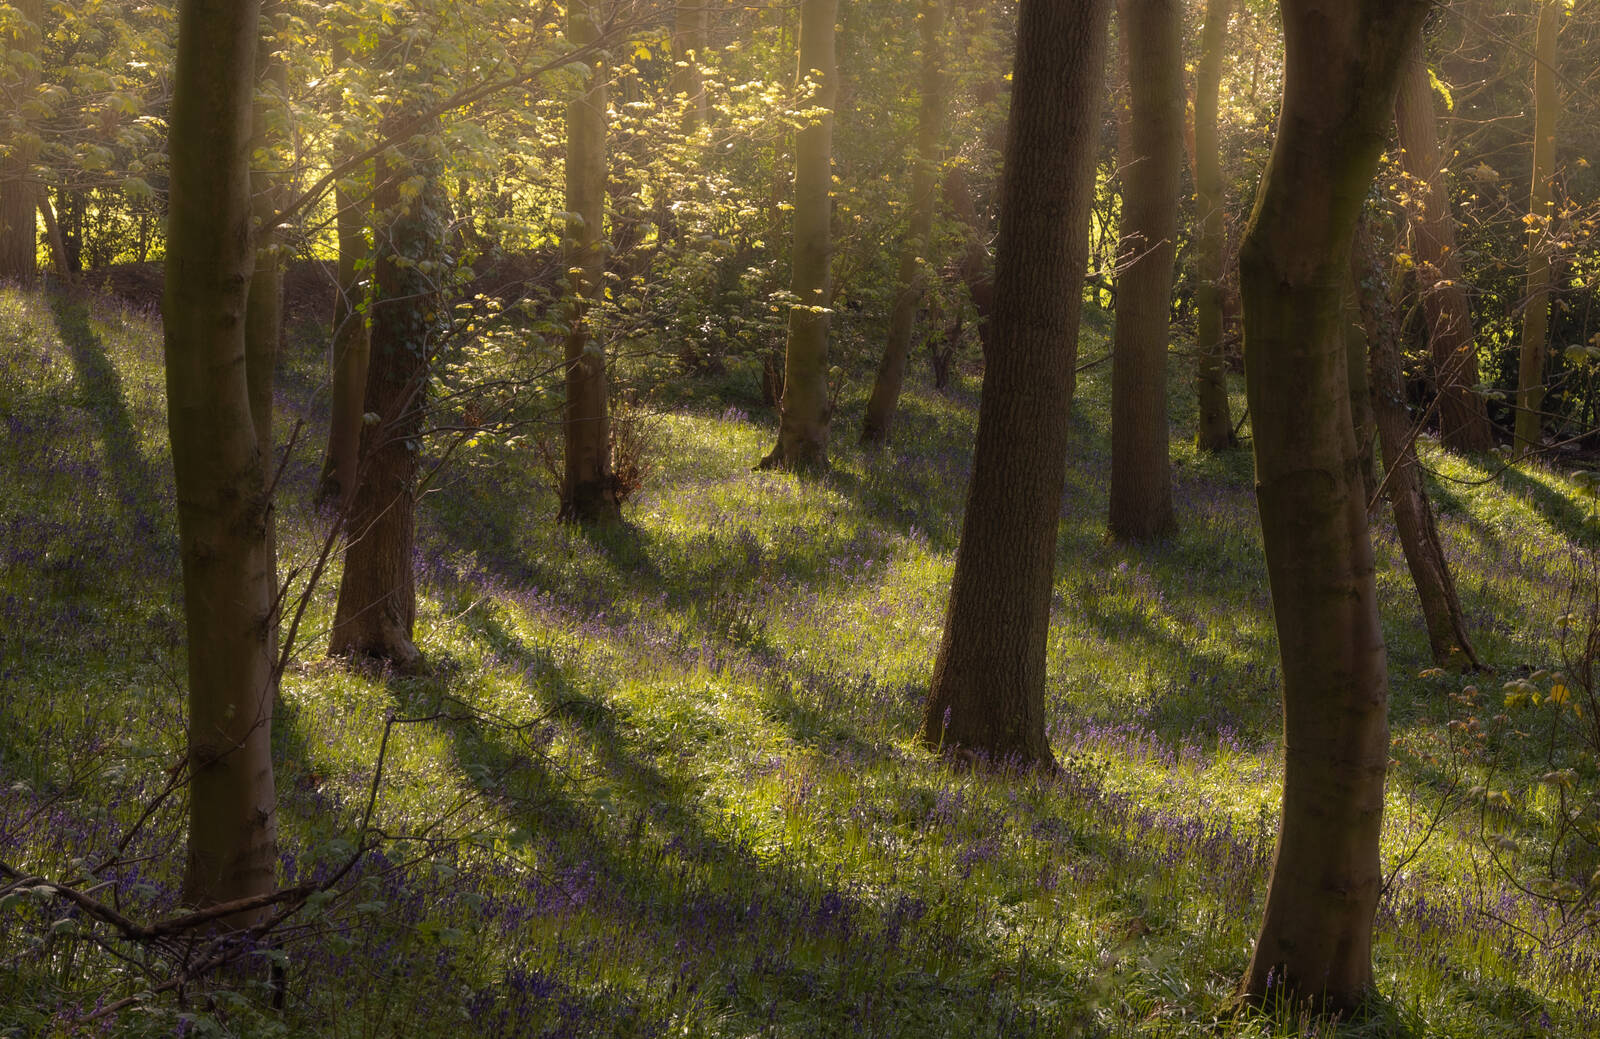 Image of Houghall Woods by Paul Gaskell